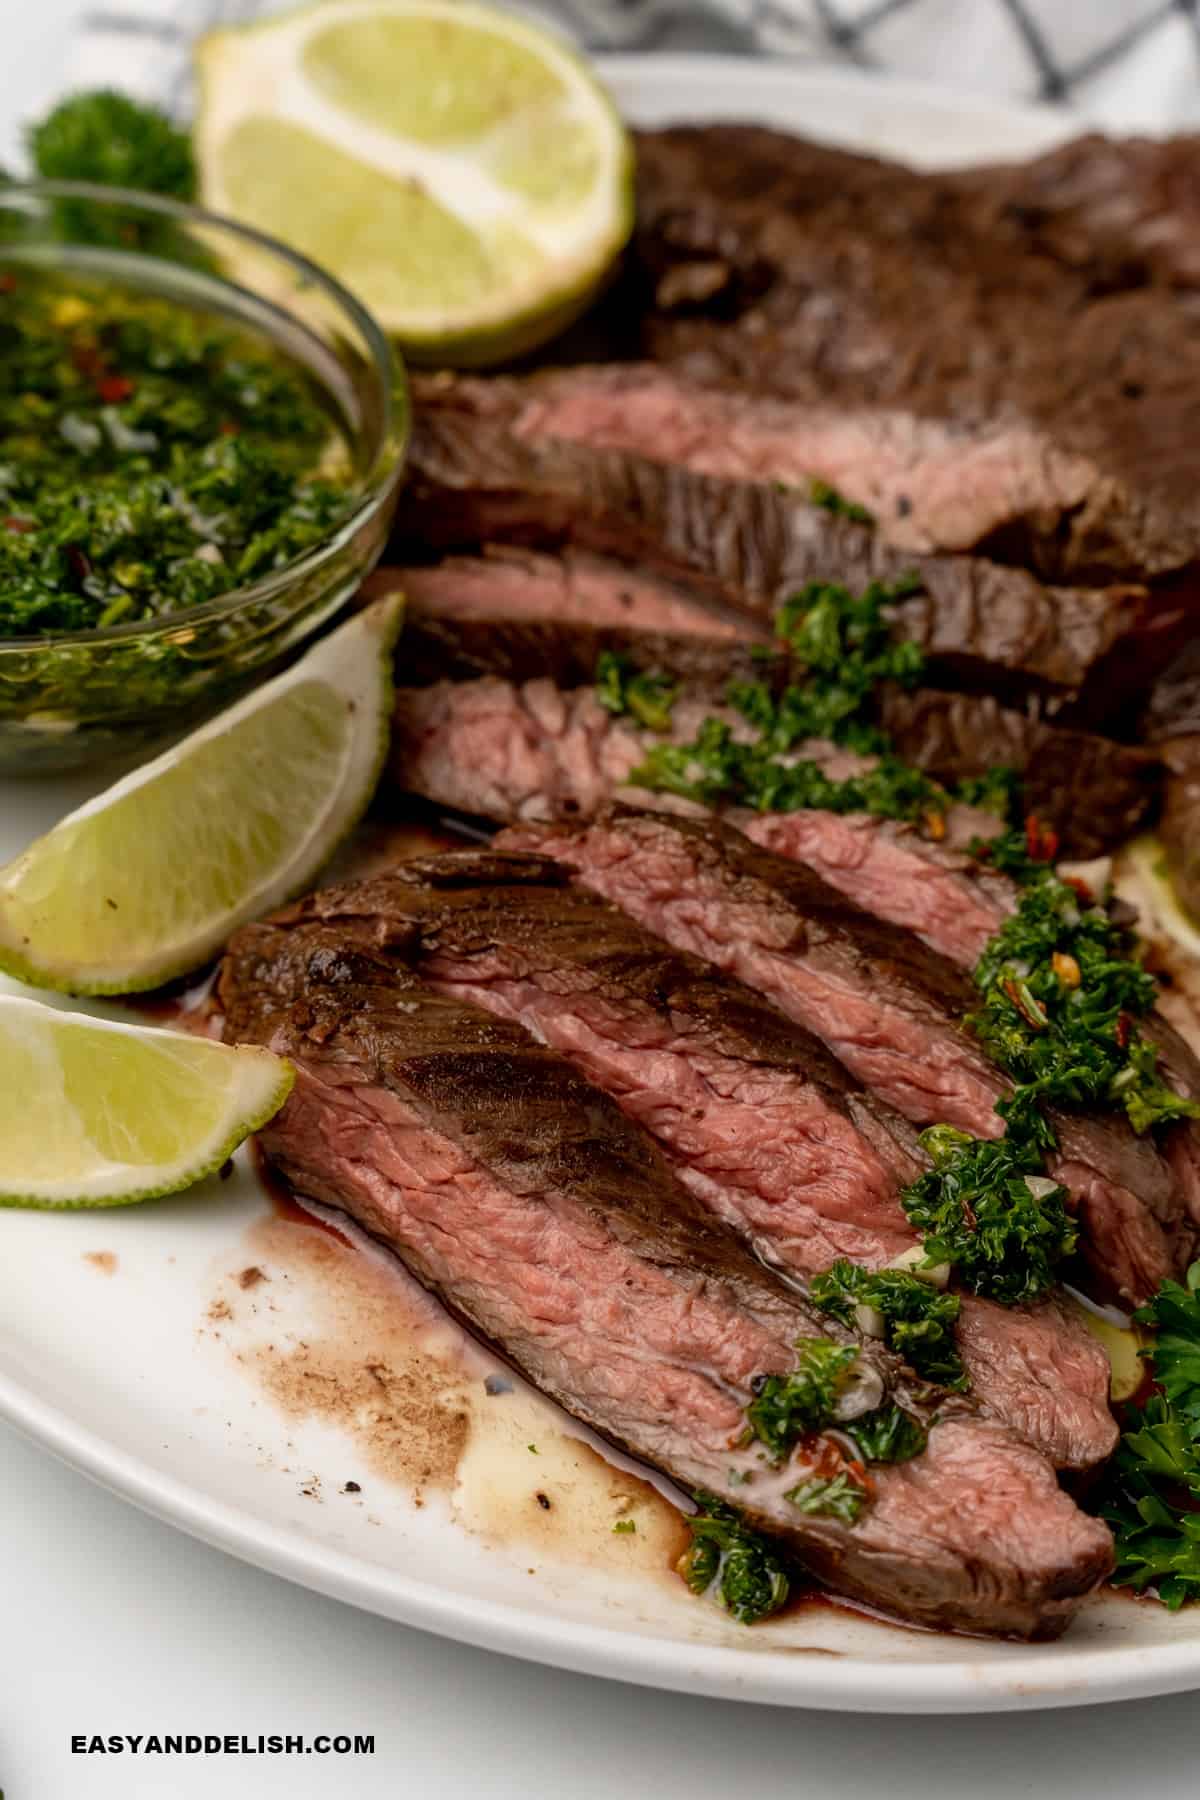 How to Cook Skirt Steak - Easy and Delish